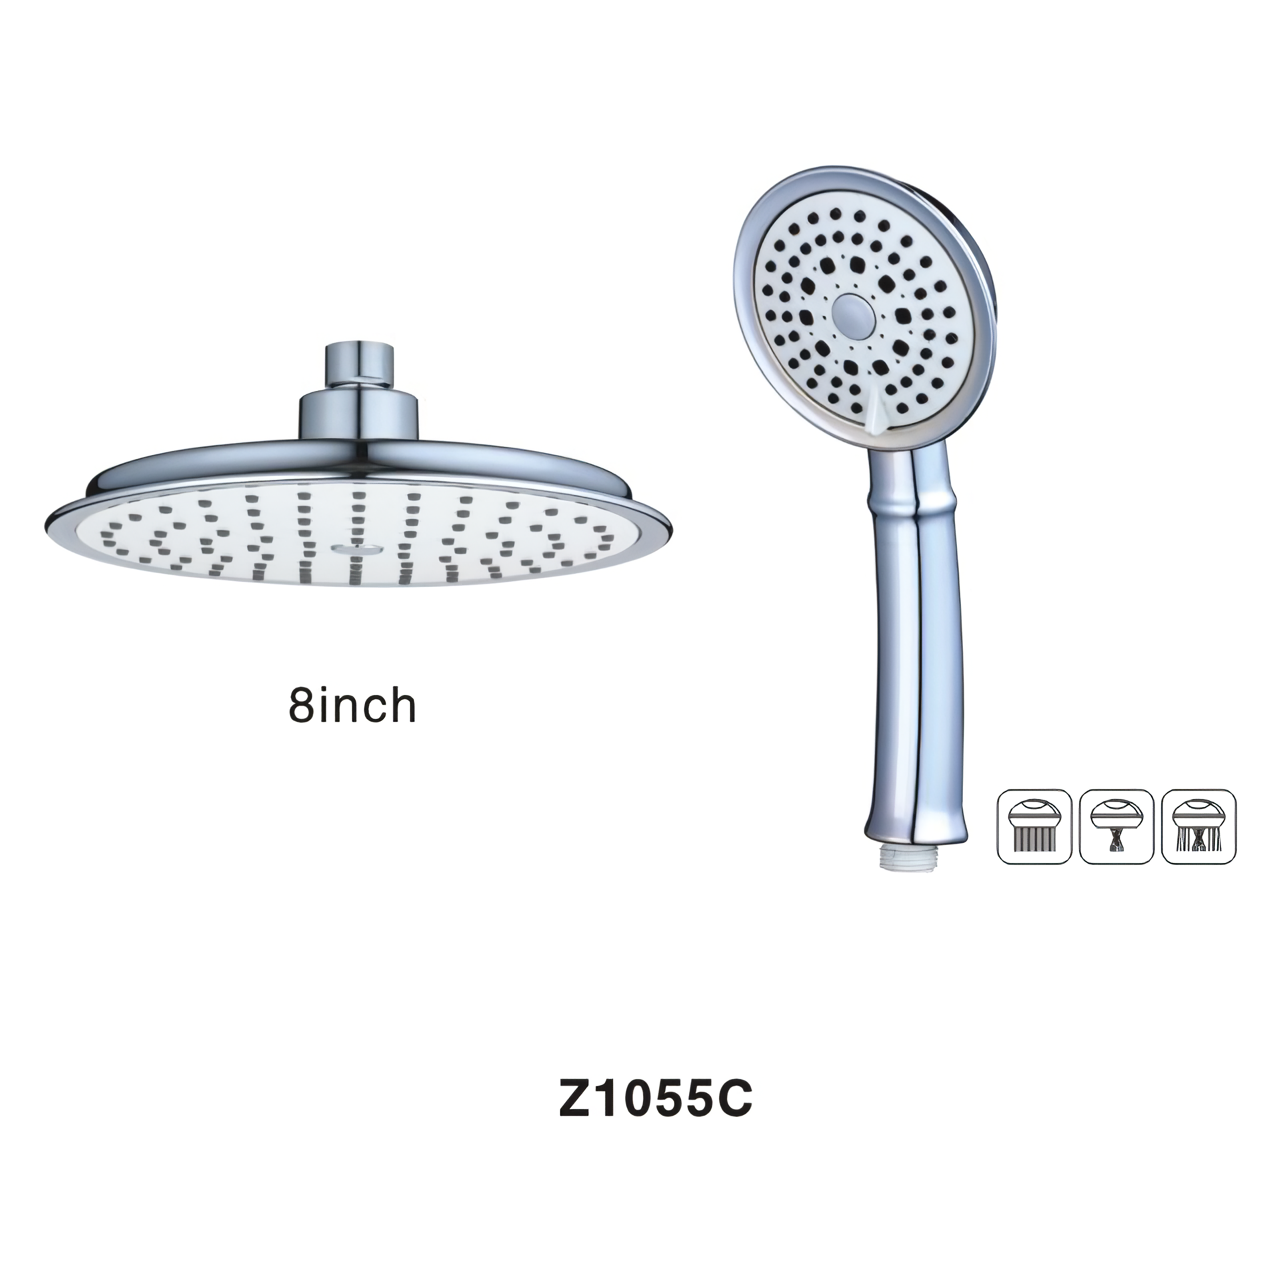 How can Bathroom Shower Head design contribute to water conservation efforts?